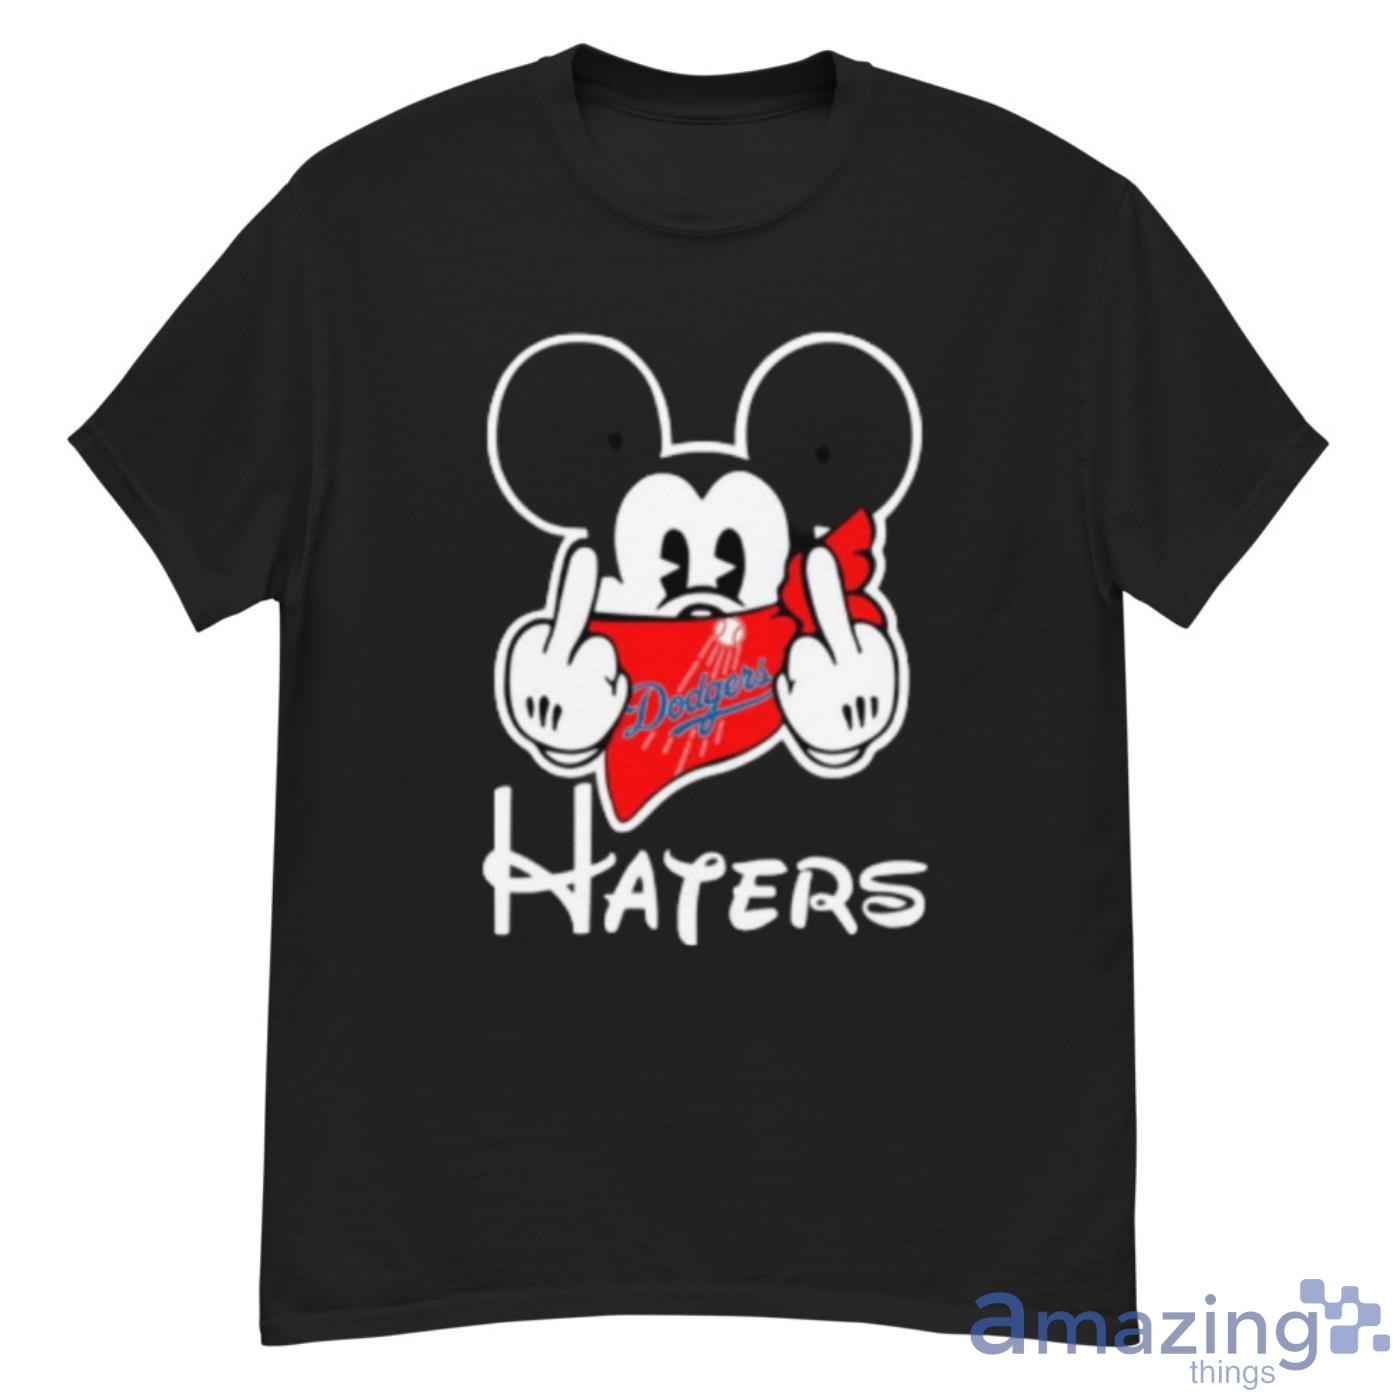 mickey mouse dodgers shirt